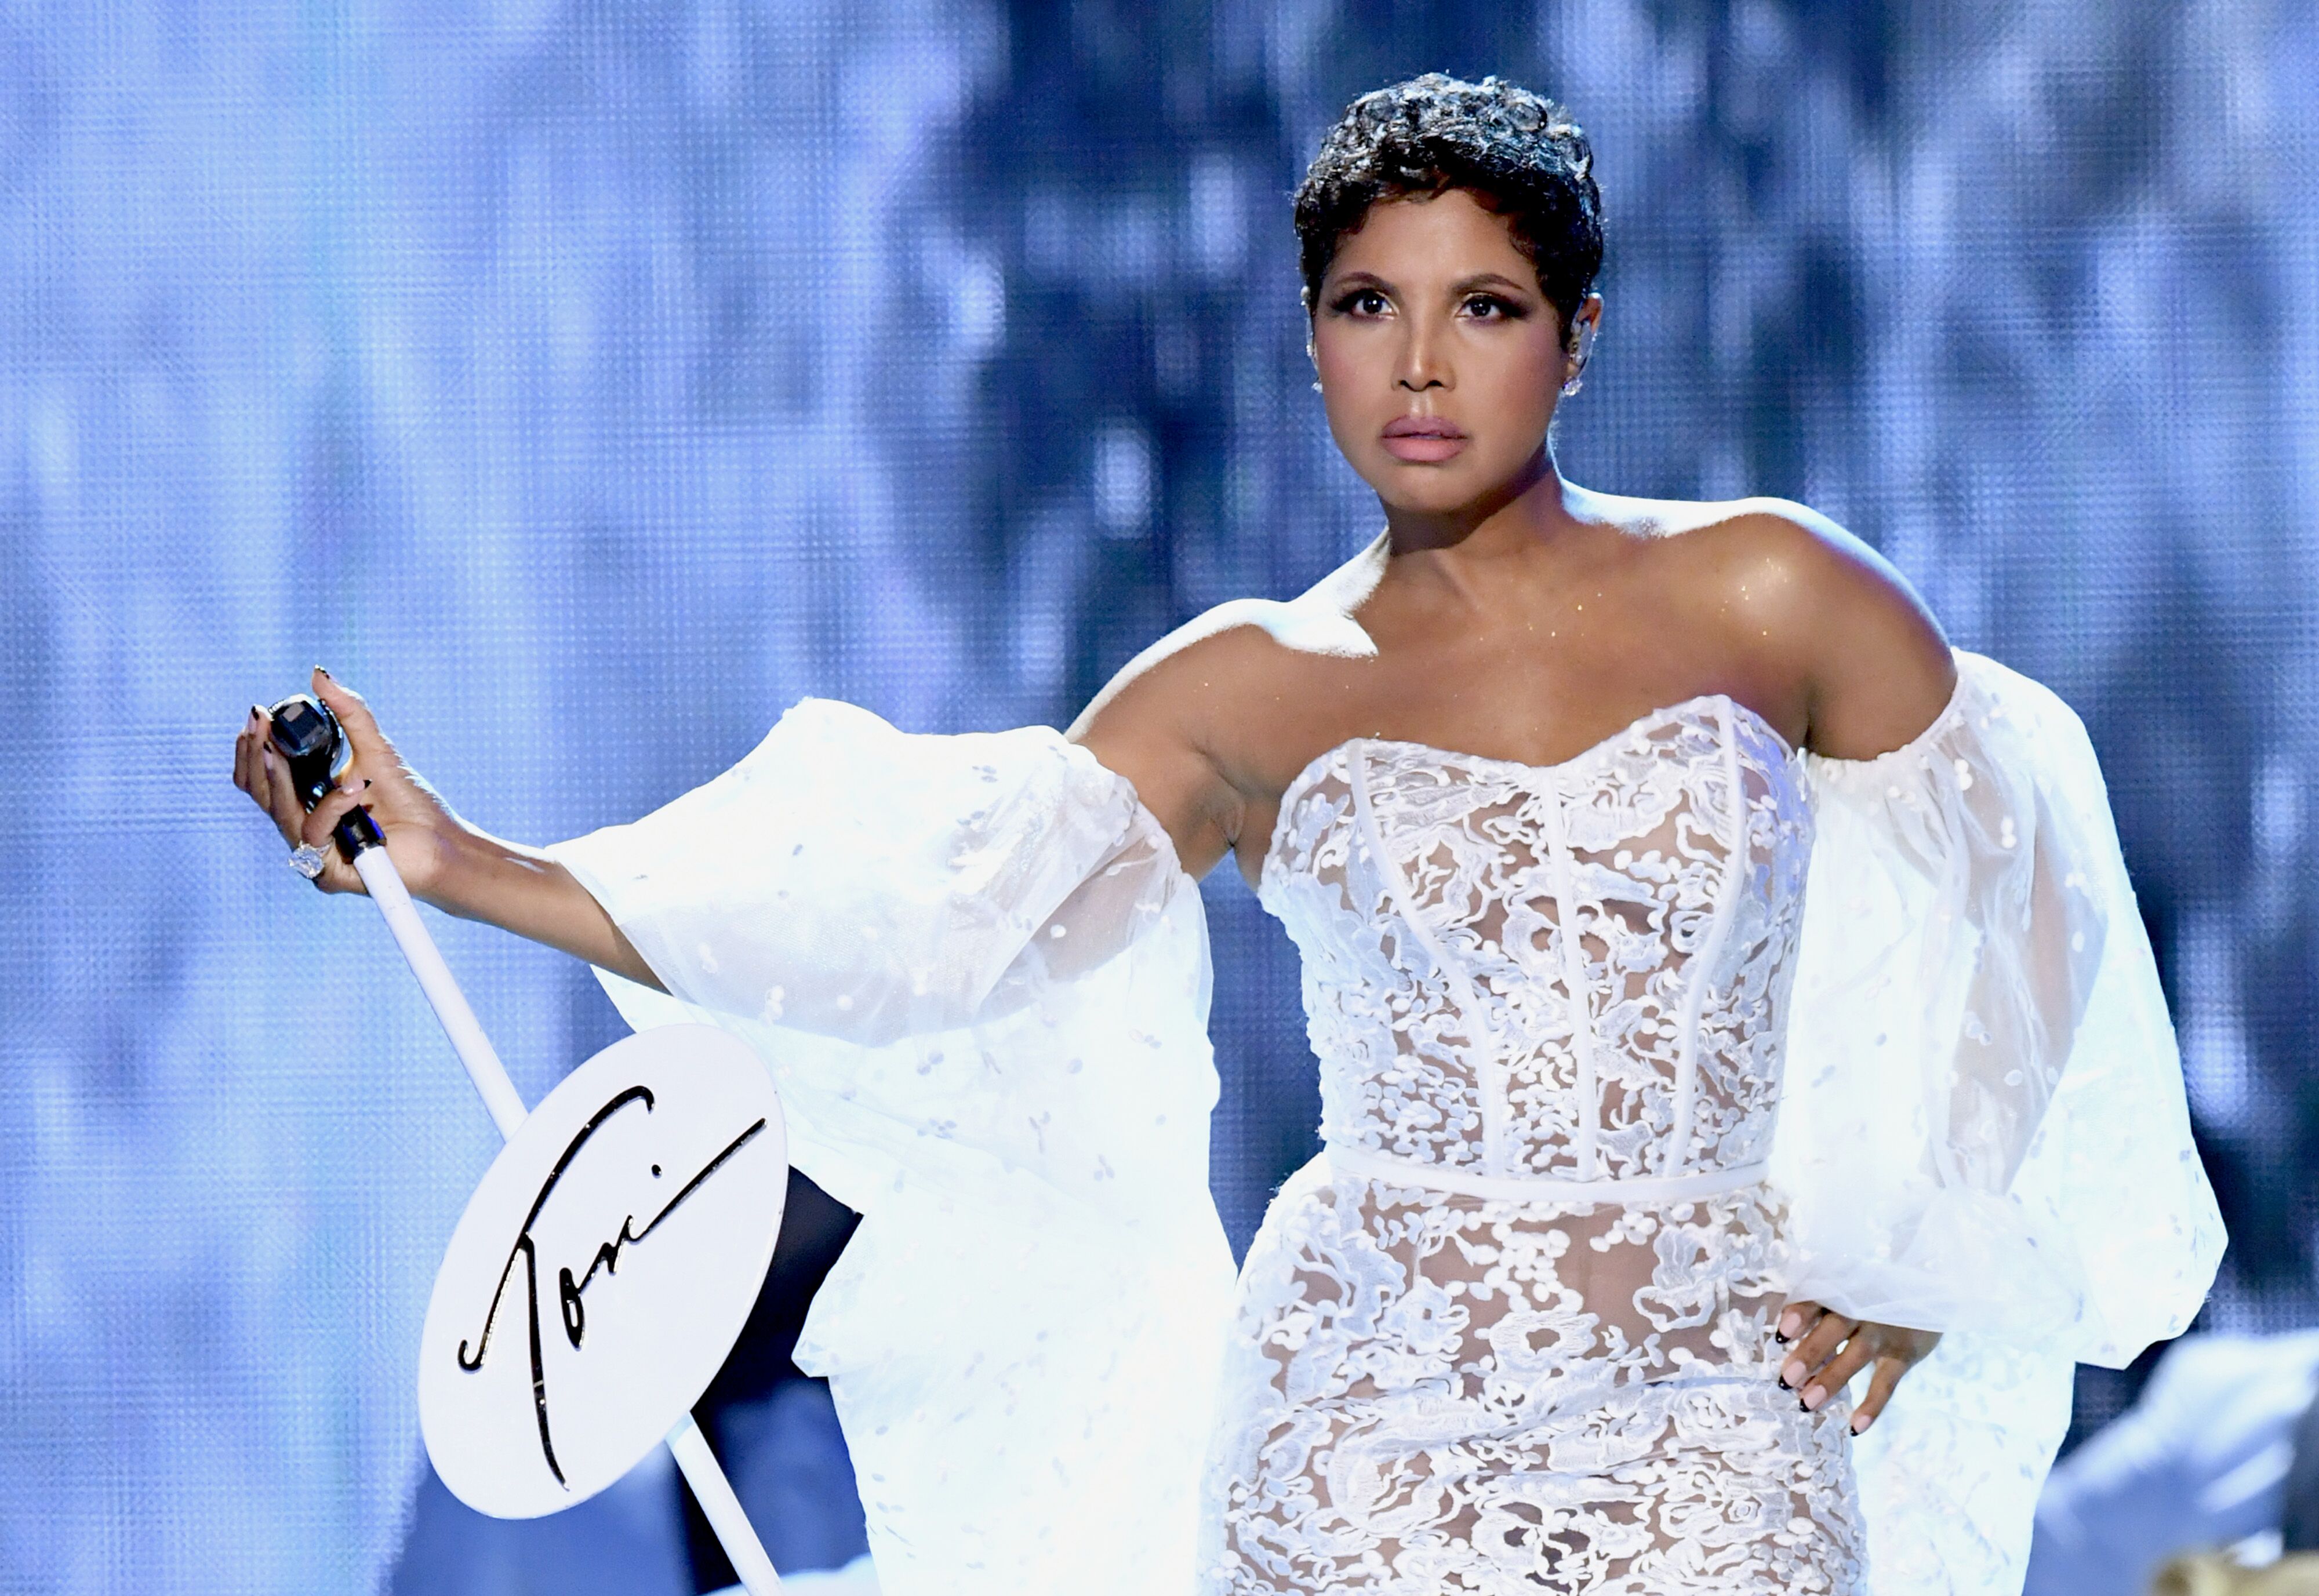 Toni Braxton performs on-stage at a concert | Source: Getty Images/GlobalImagesUkraine